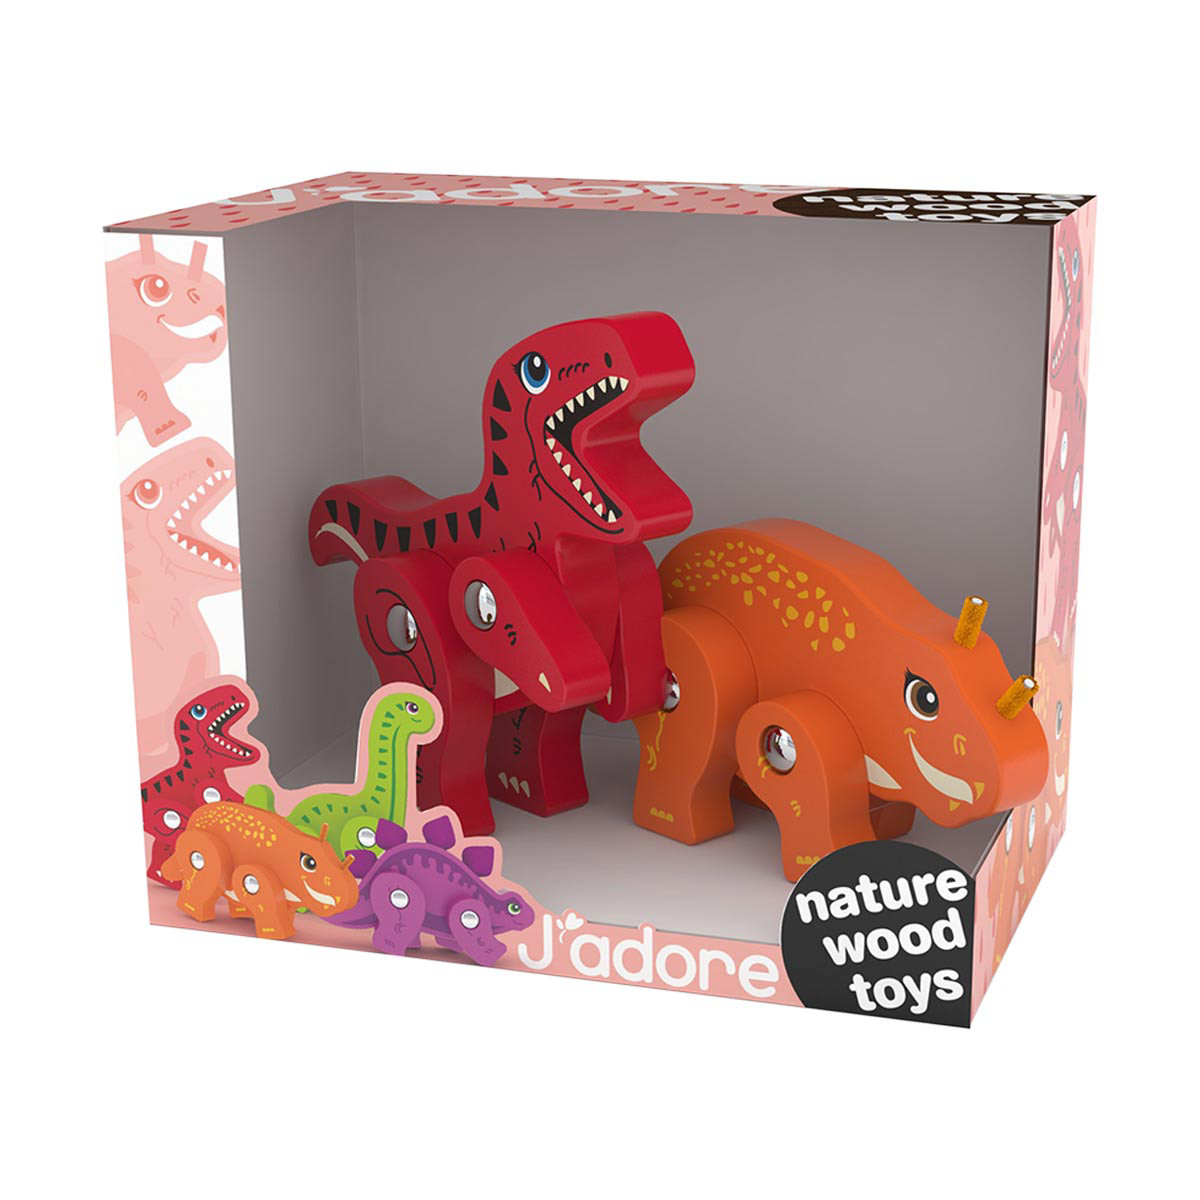 J'adore Wooden Moveable Dinosaurs Set